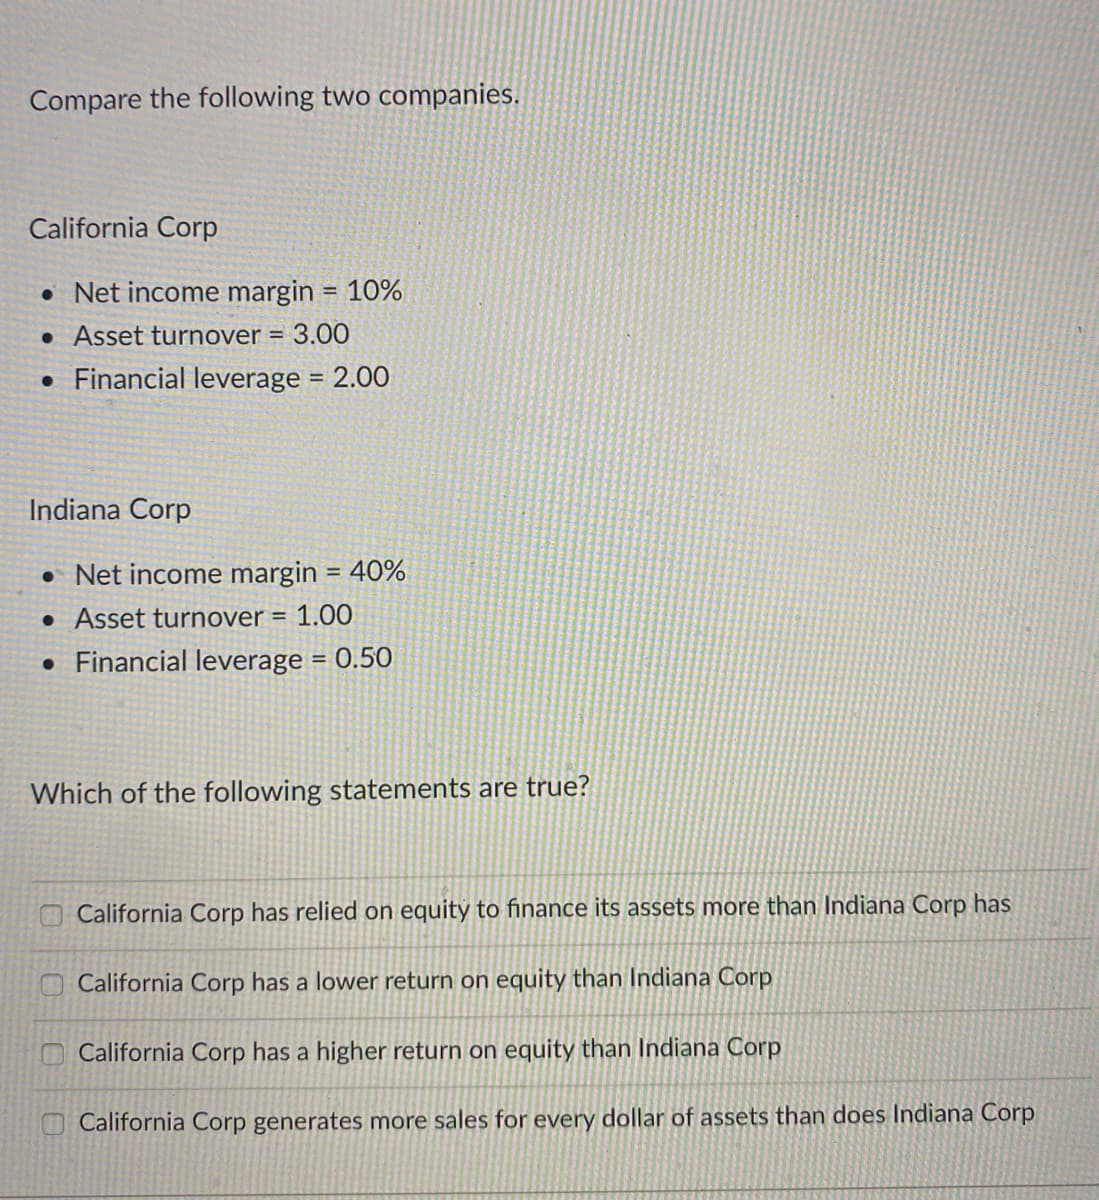 Compare the following two companies.
California Corp
• Net income margin = 10%
• Asset turnover = 3.00
• Financial leverage = 2.00
Indiana Corp
• Net income margin = 40%
• Asset turnover = 1.00
!3!
• Financial leverage = 0.50
Which of the following statements are true?
California Corp has relied on equitý to finance its assets more than Indiana Corp has
California Corp has a lower return on equity than Indiana Corp
OCalifornia Corp has a higher return on equity than Indiana Corp
California Corp generates more sales for every dollar of assets than does Indiana Corp
